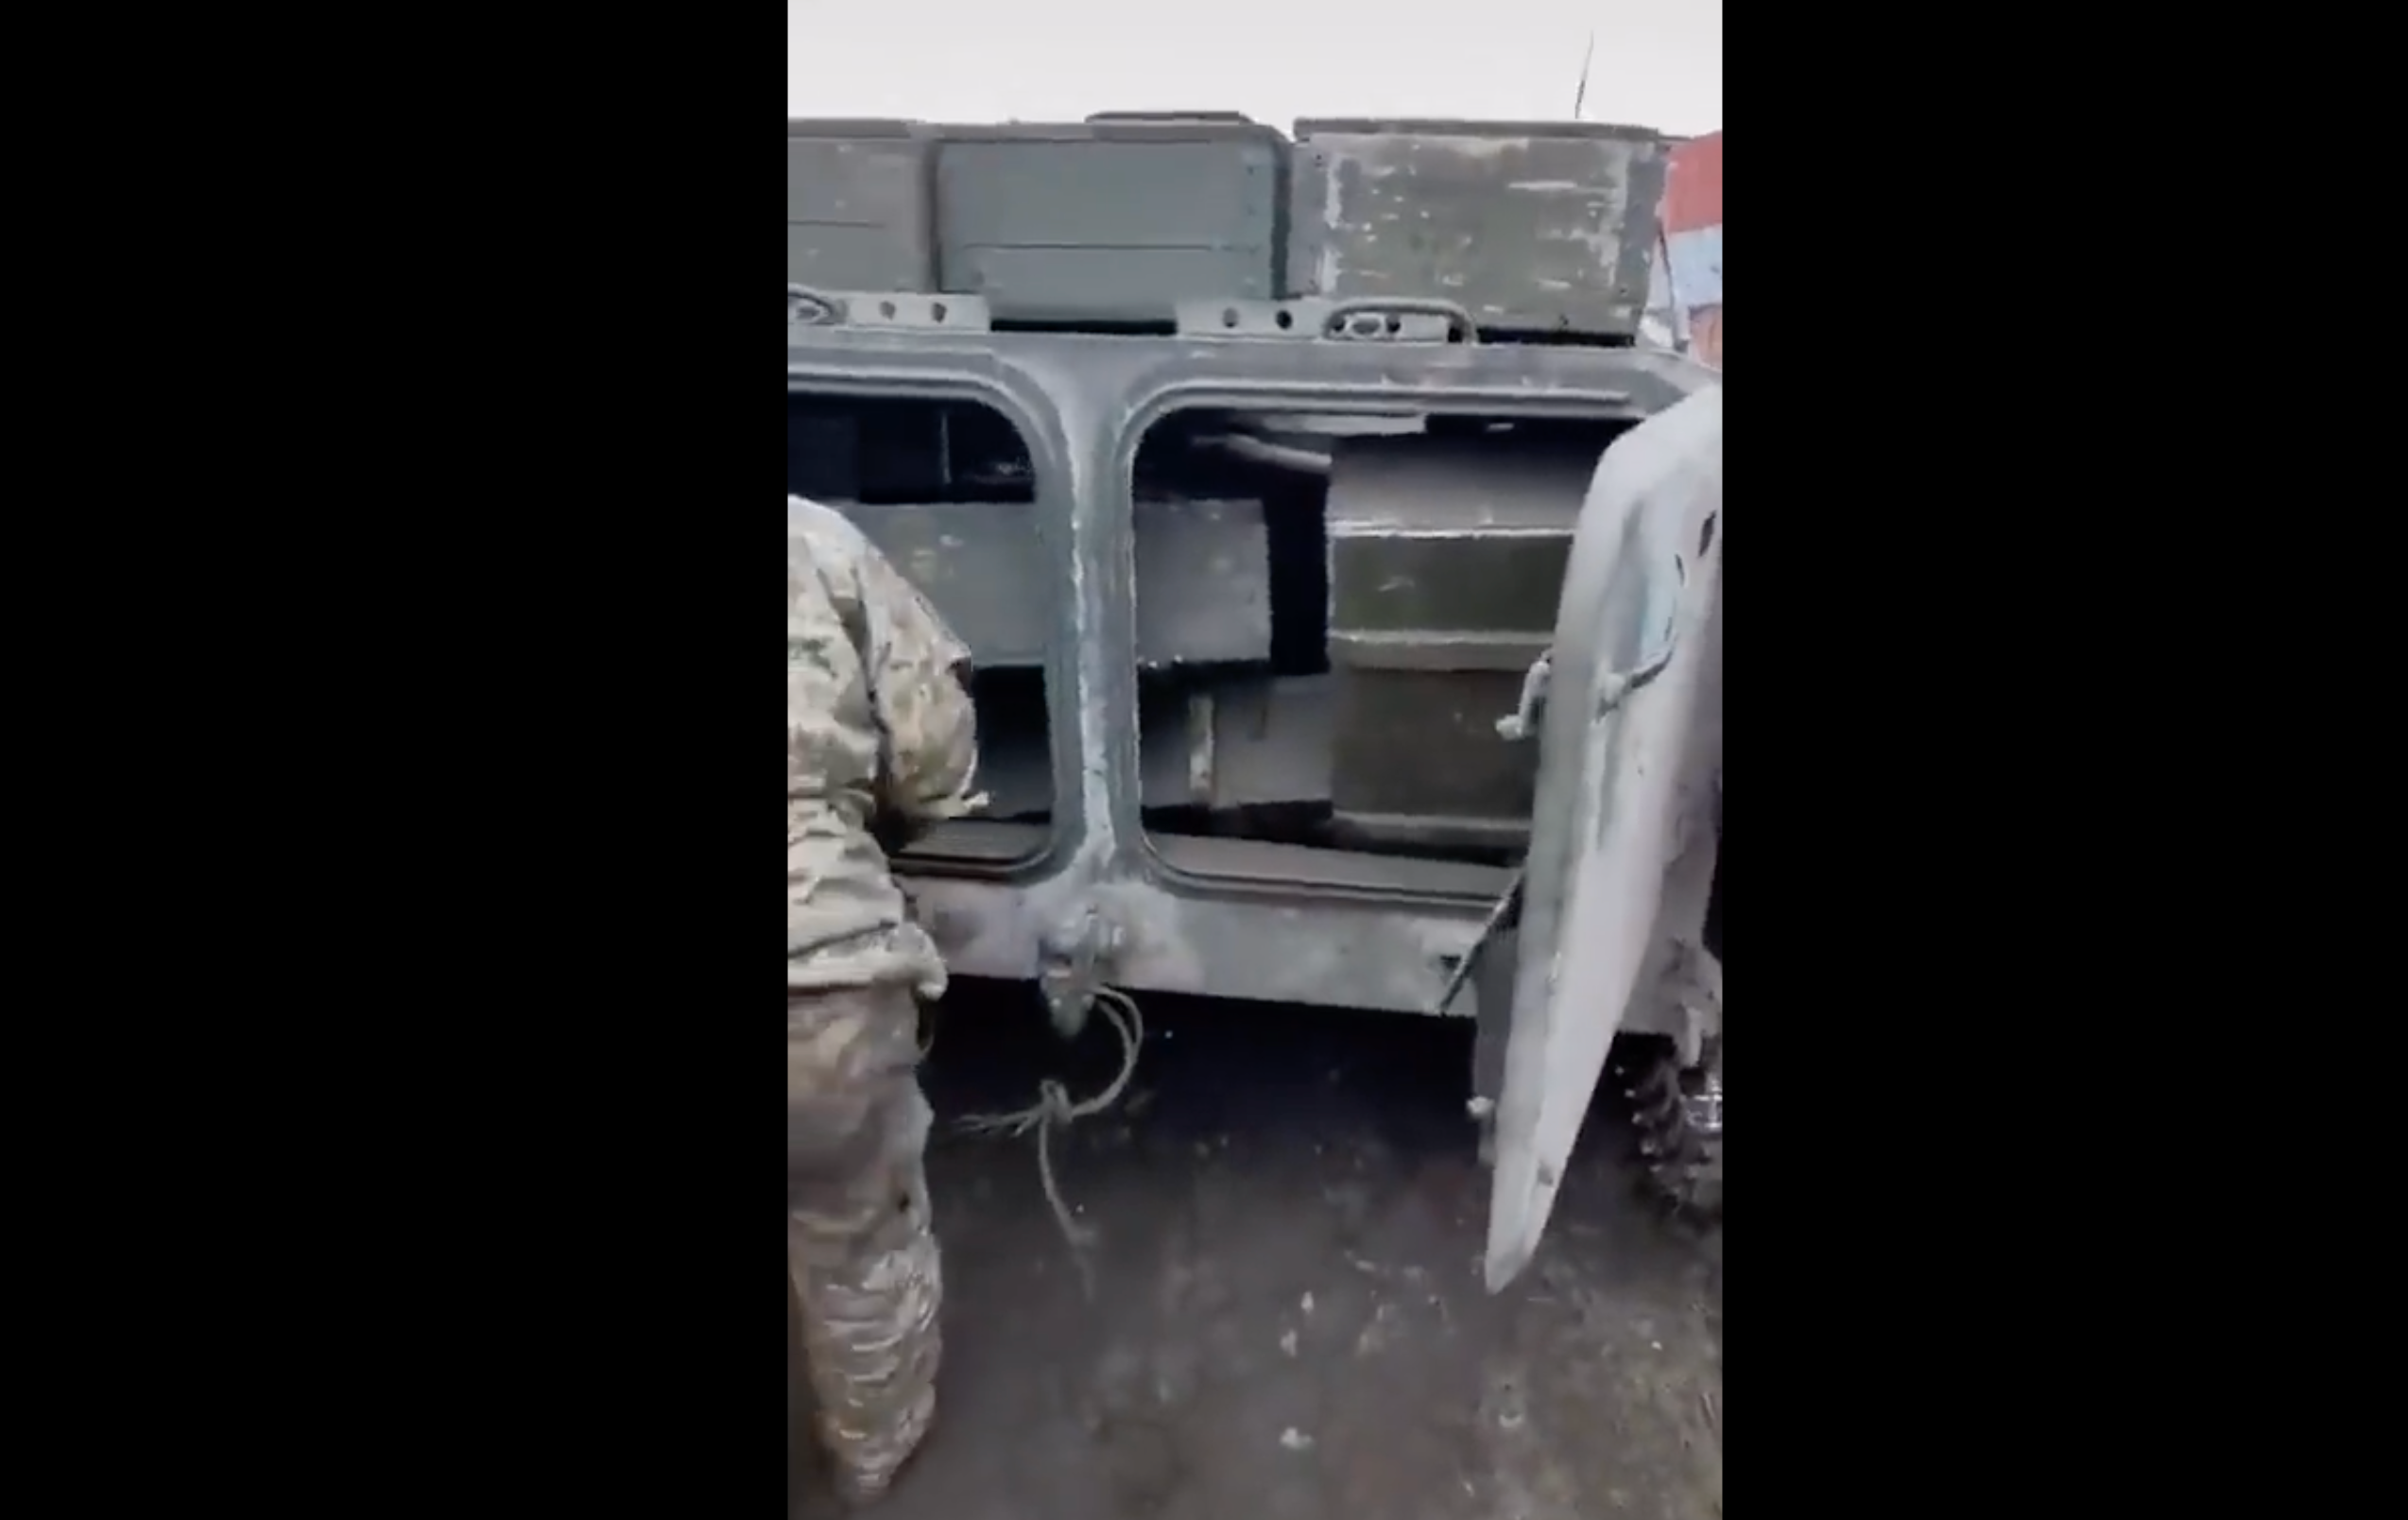 Boxes of ammunition can be seen stacked within the vehicle